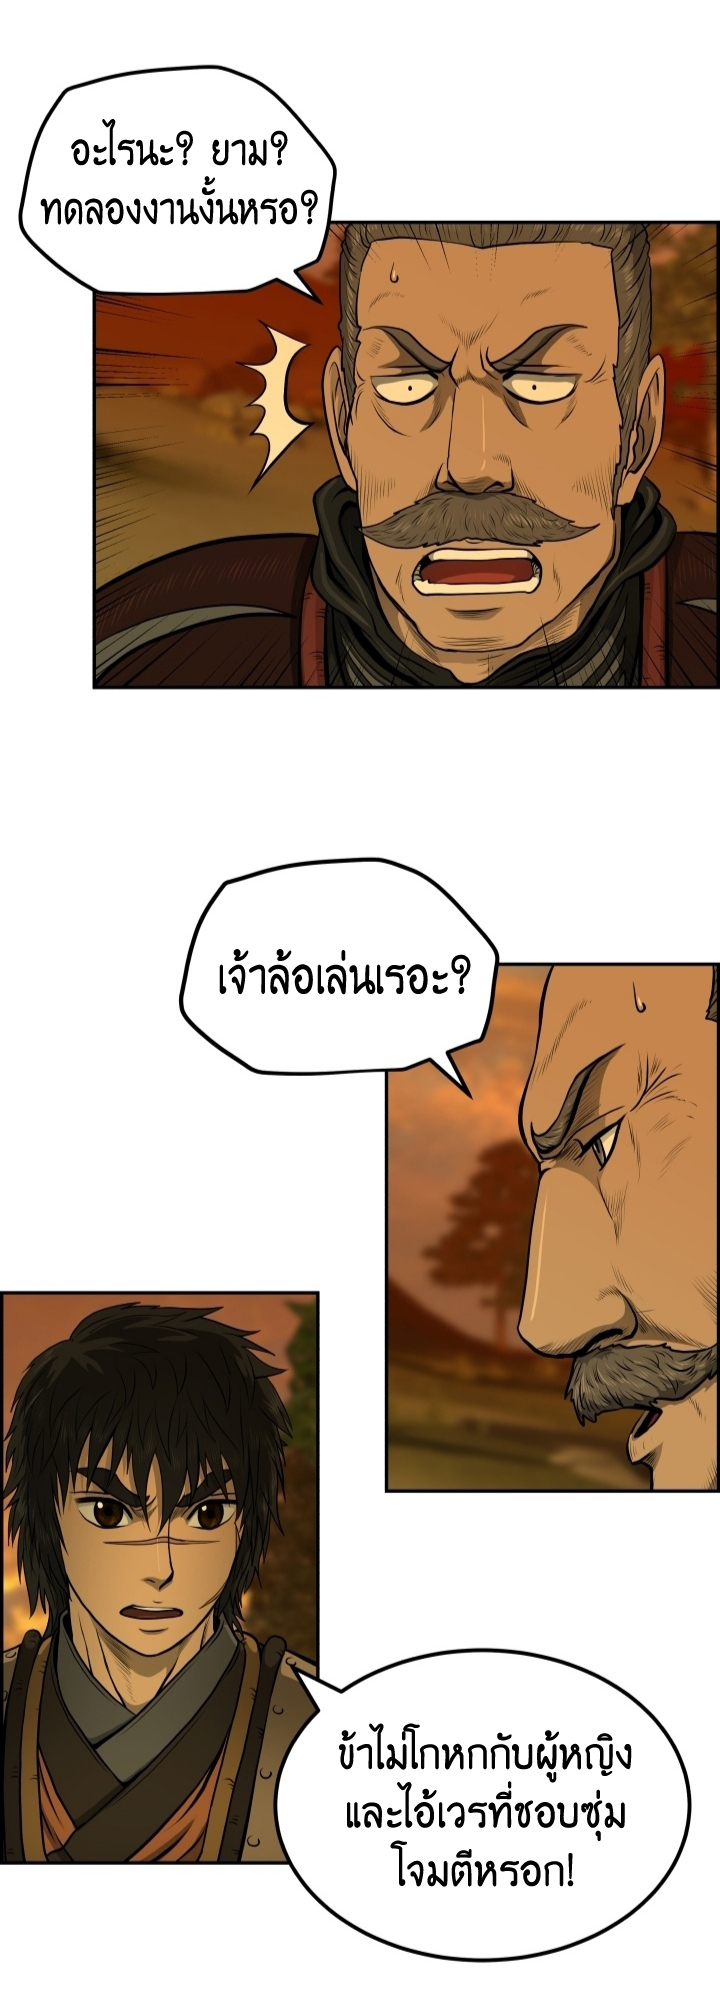 Blade of Wind and Thunder 28 (38)